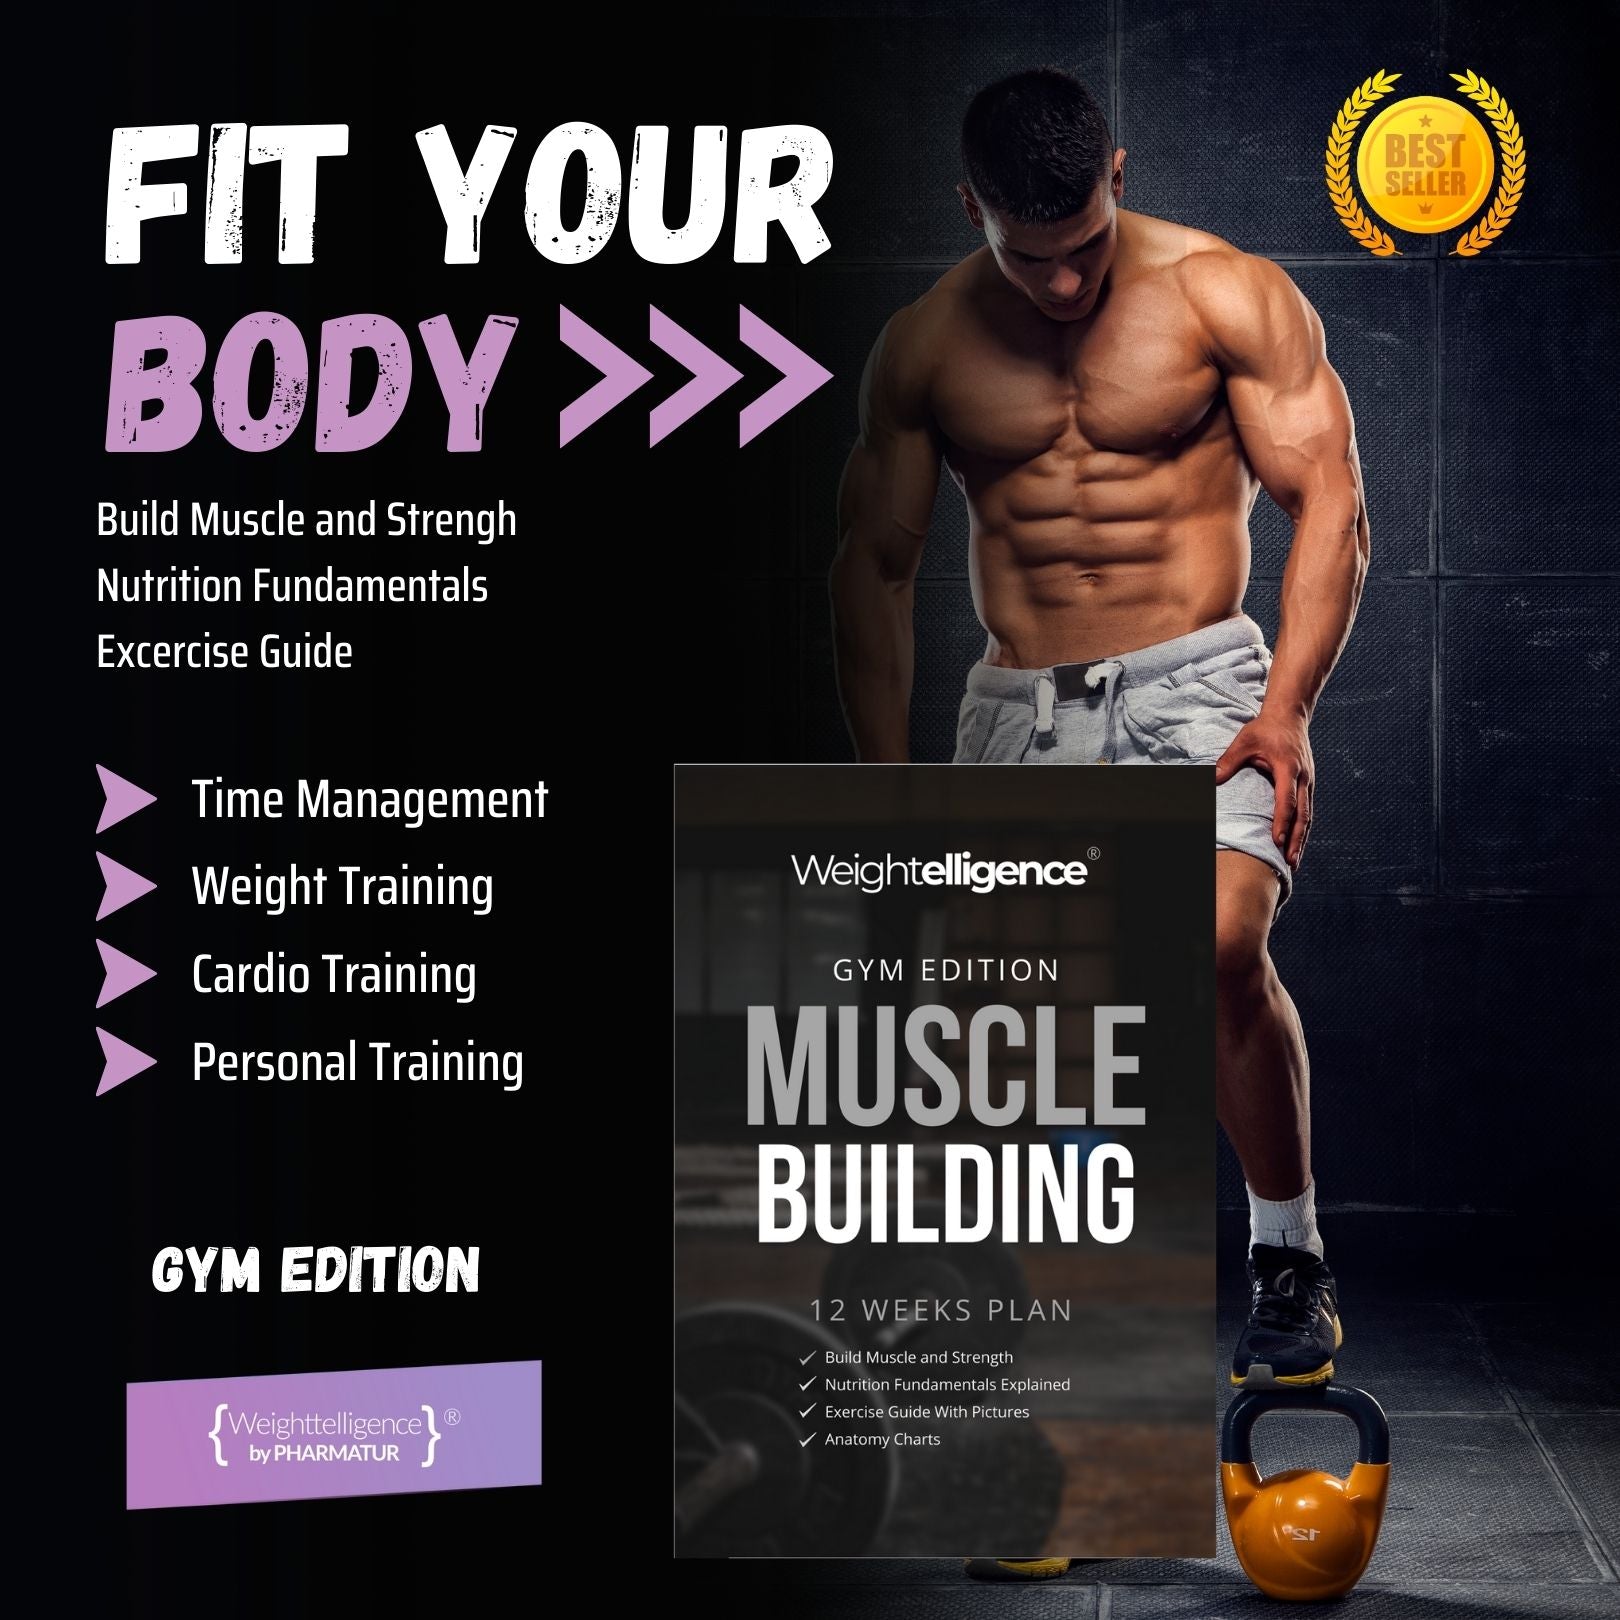 Weightelligence Muscle Building Extrem Gym Edition